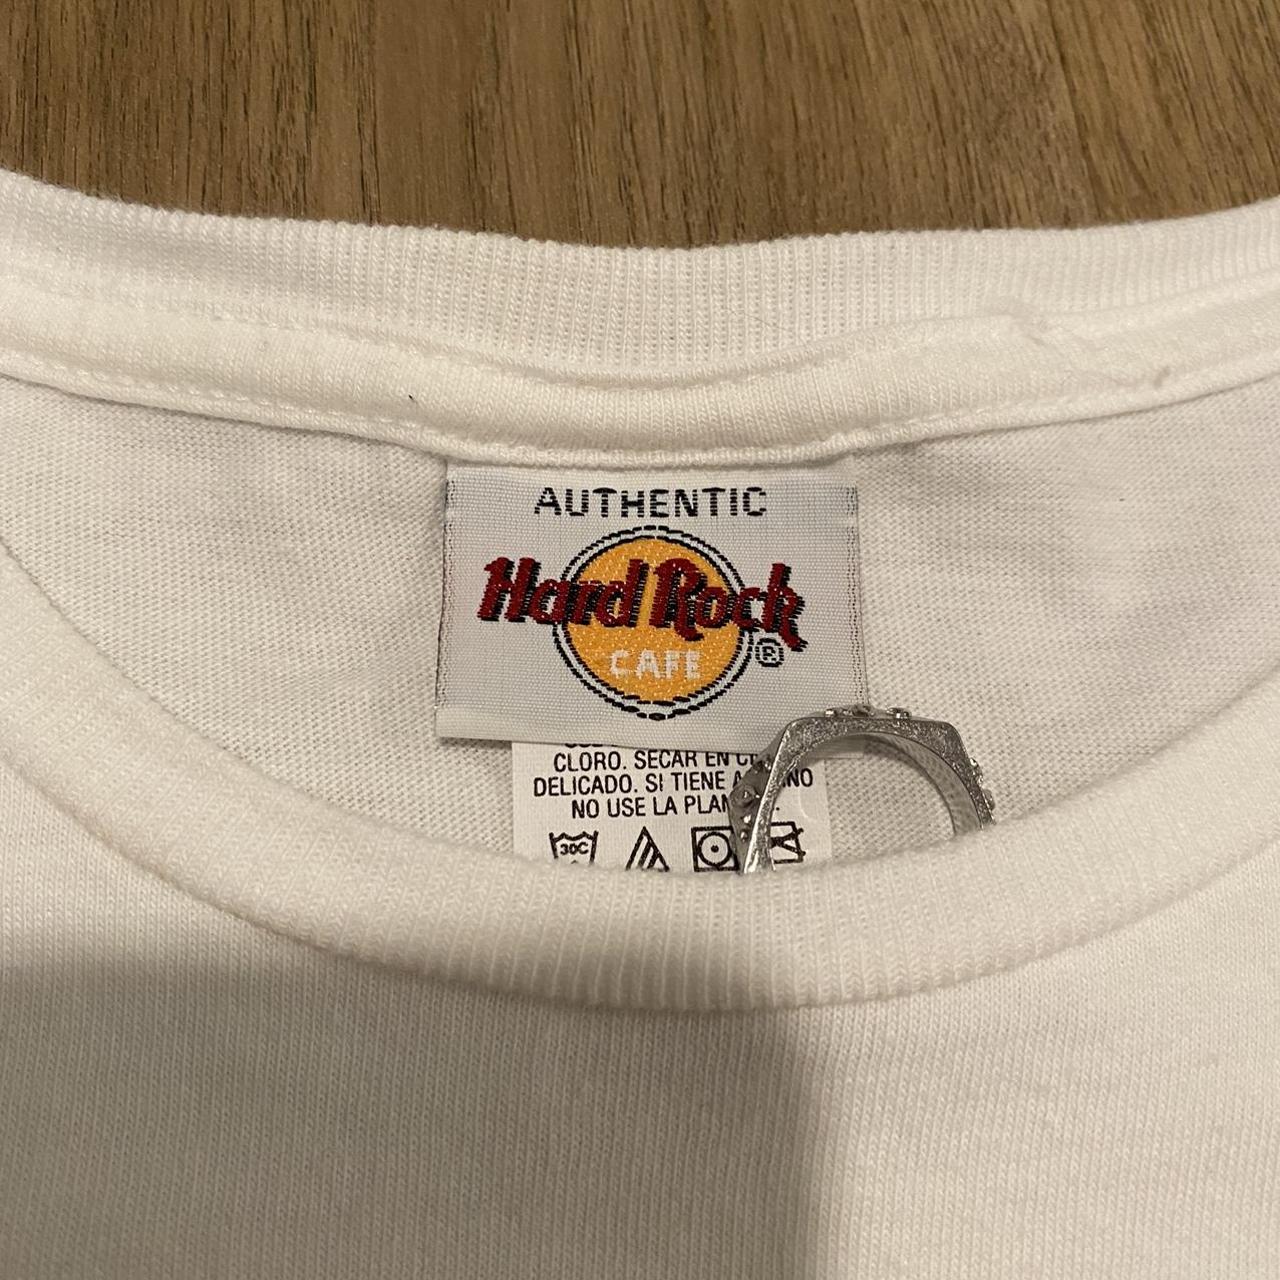 Hard Rock Cafe Women's White and Blue T-shirt (3)